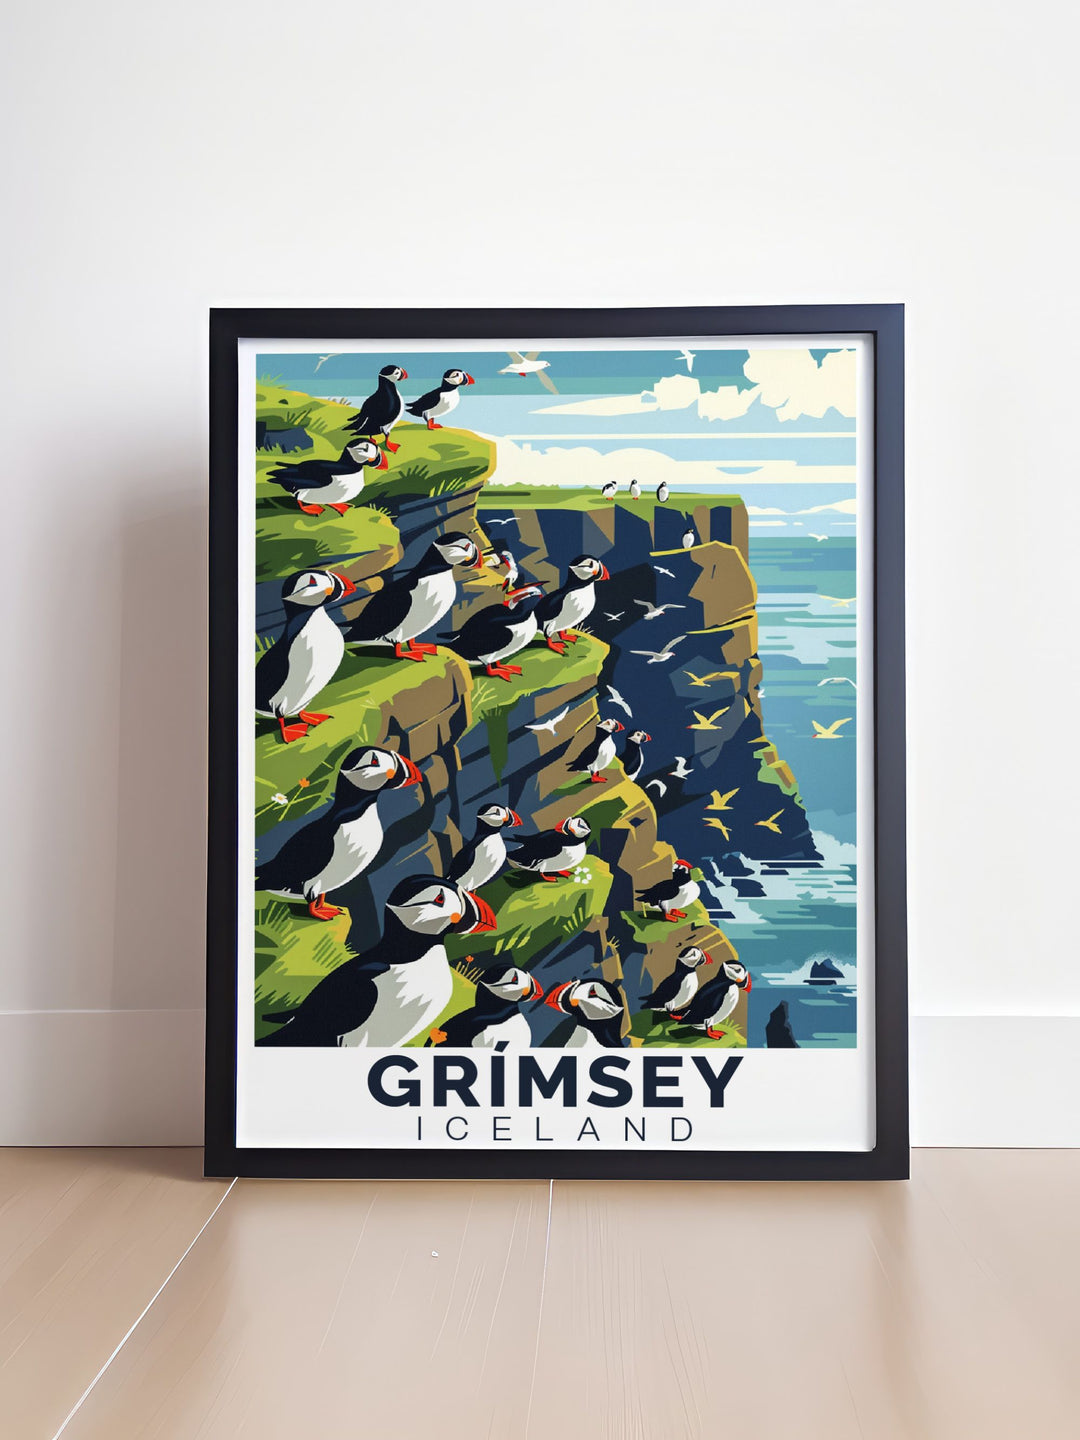 This travel poster features the Grímsey Lighthouse standing tall against the rugged landscape, offering a glimpse into the islands maritime history and natural charm.